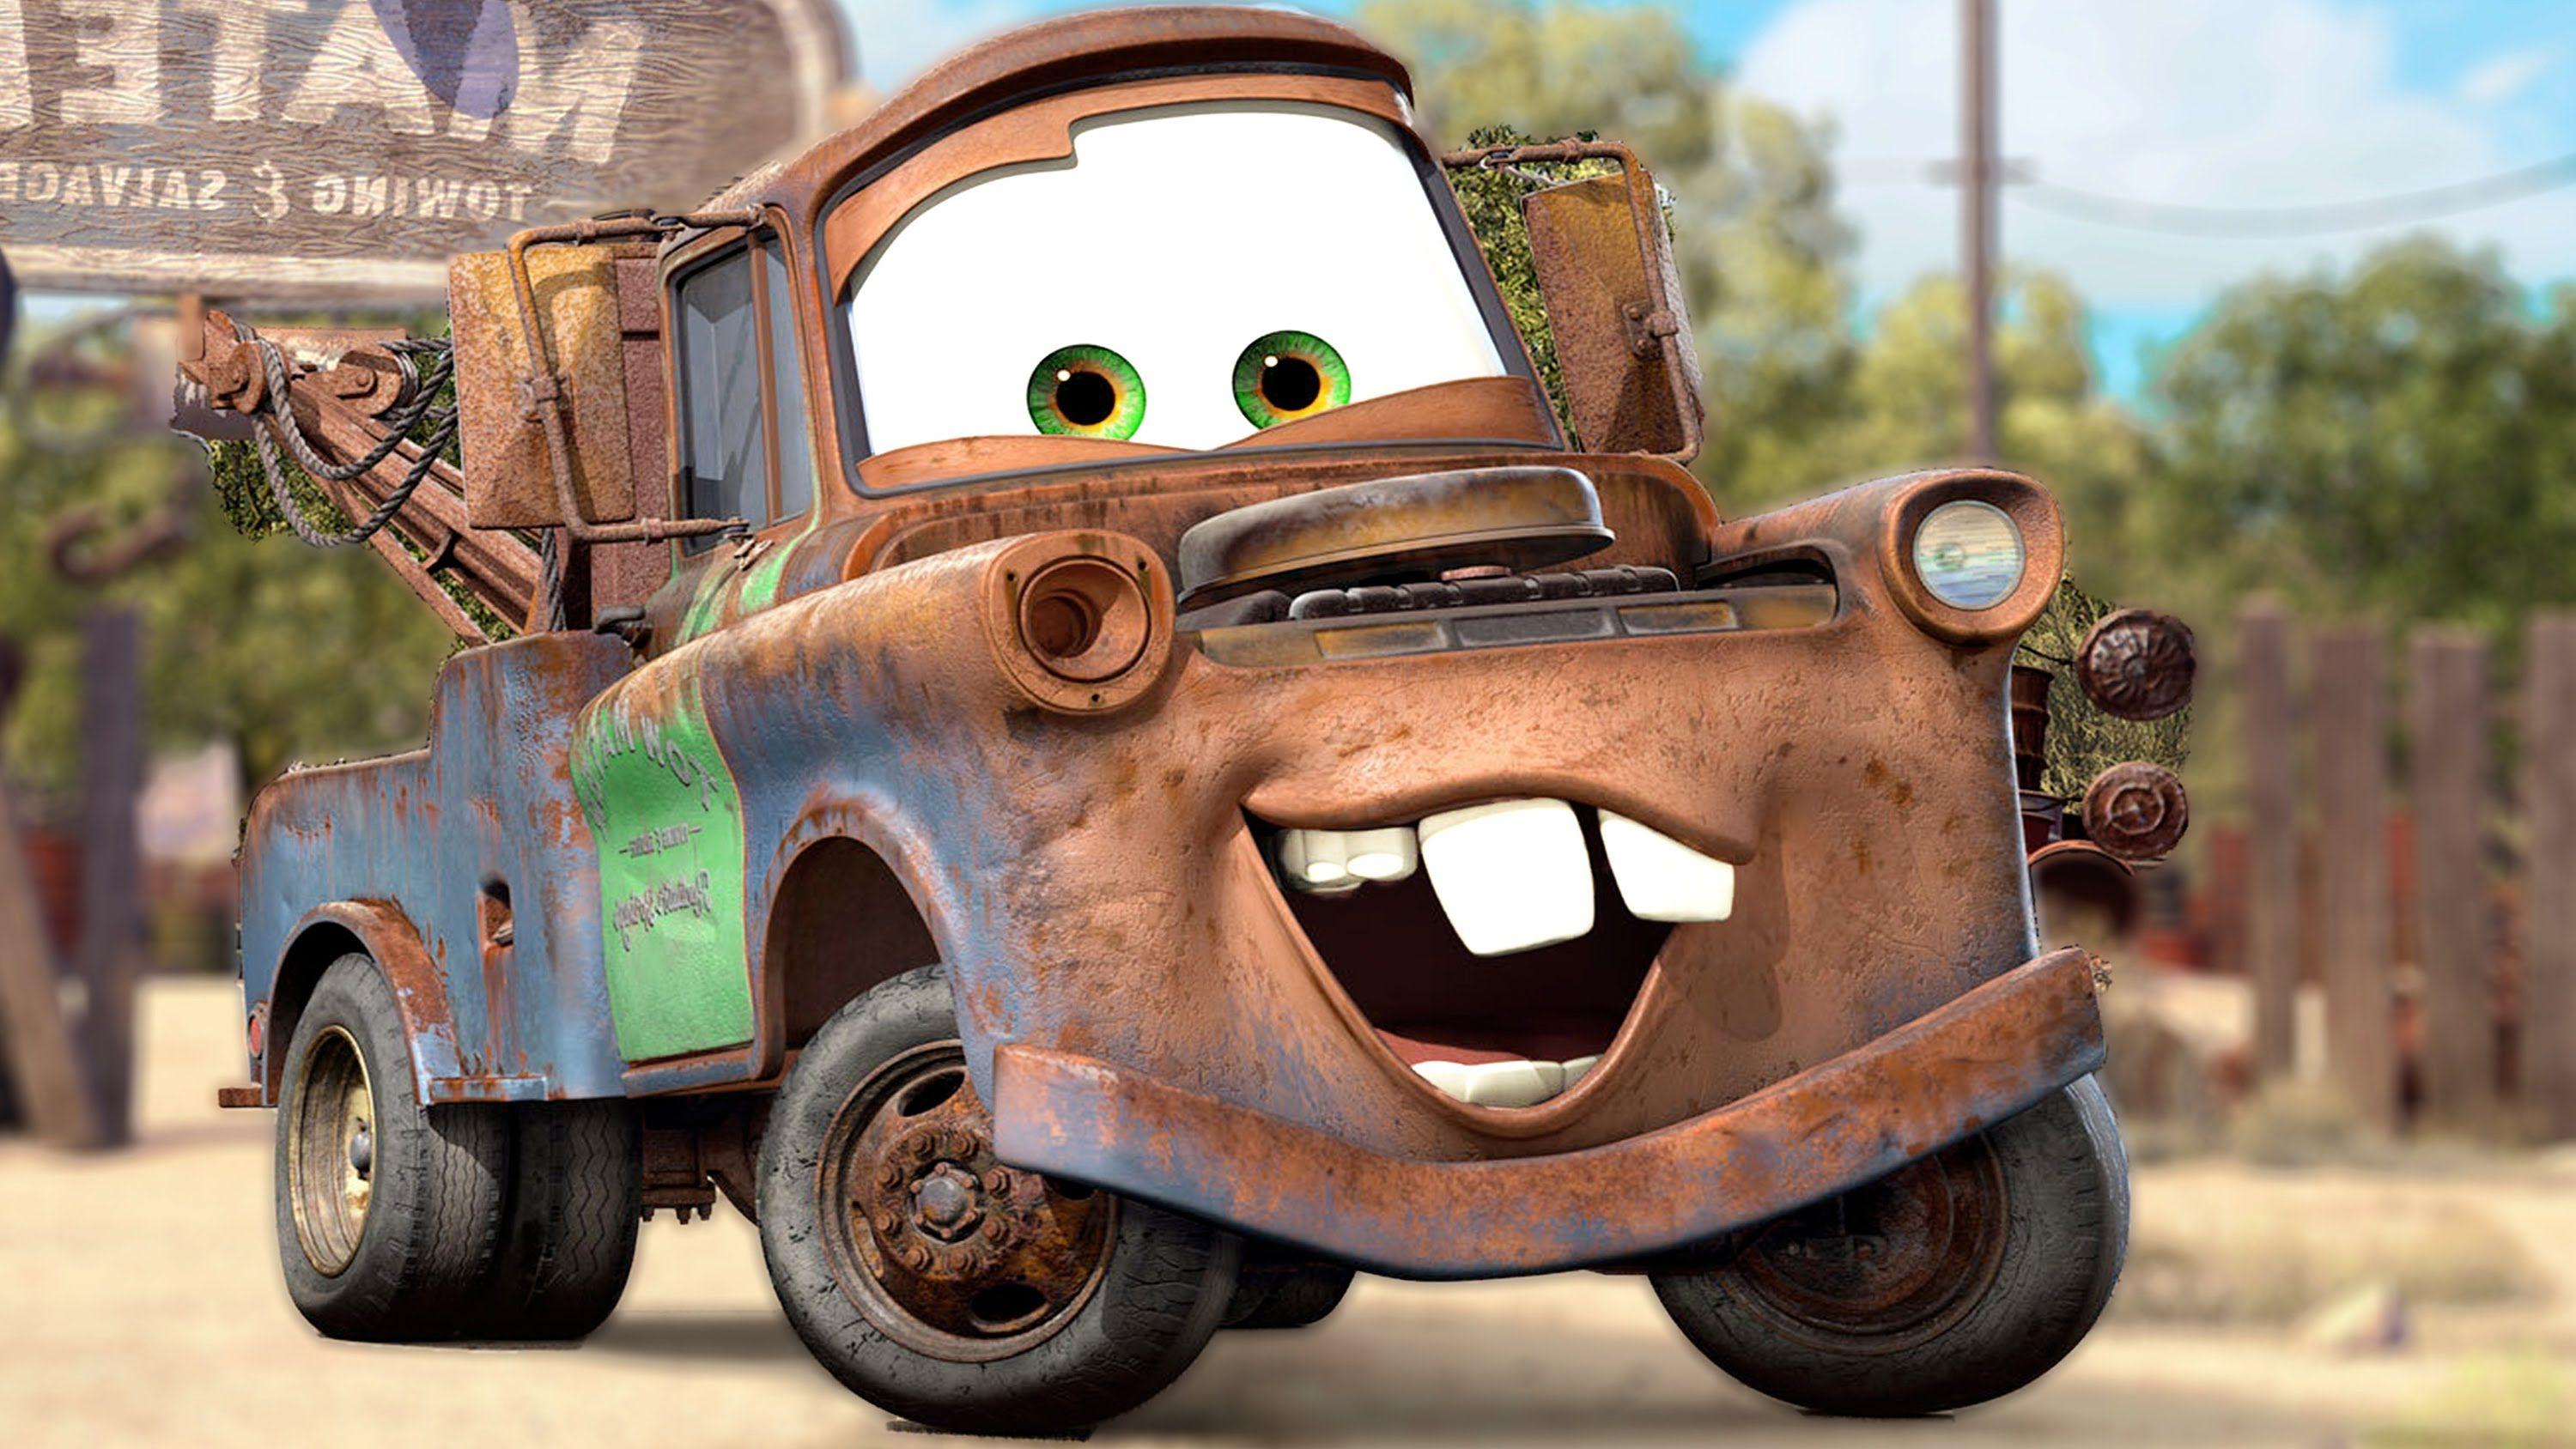 Tow Mater Pics New The Truck Image Pictures HD Wallpapers And.